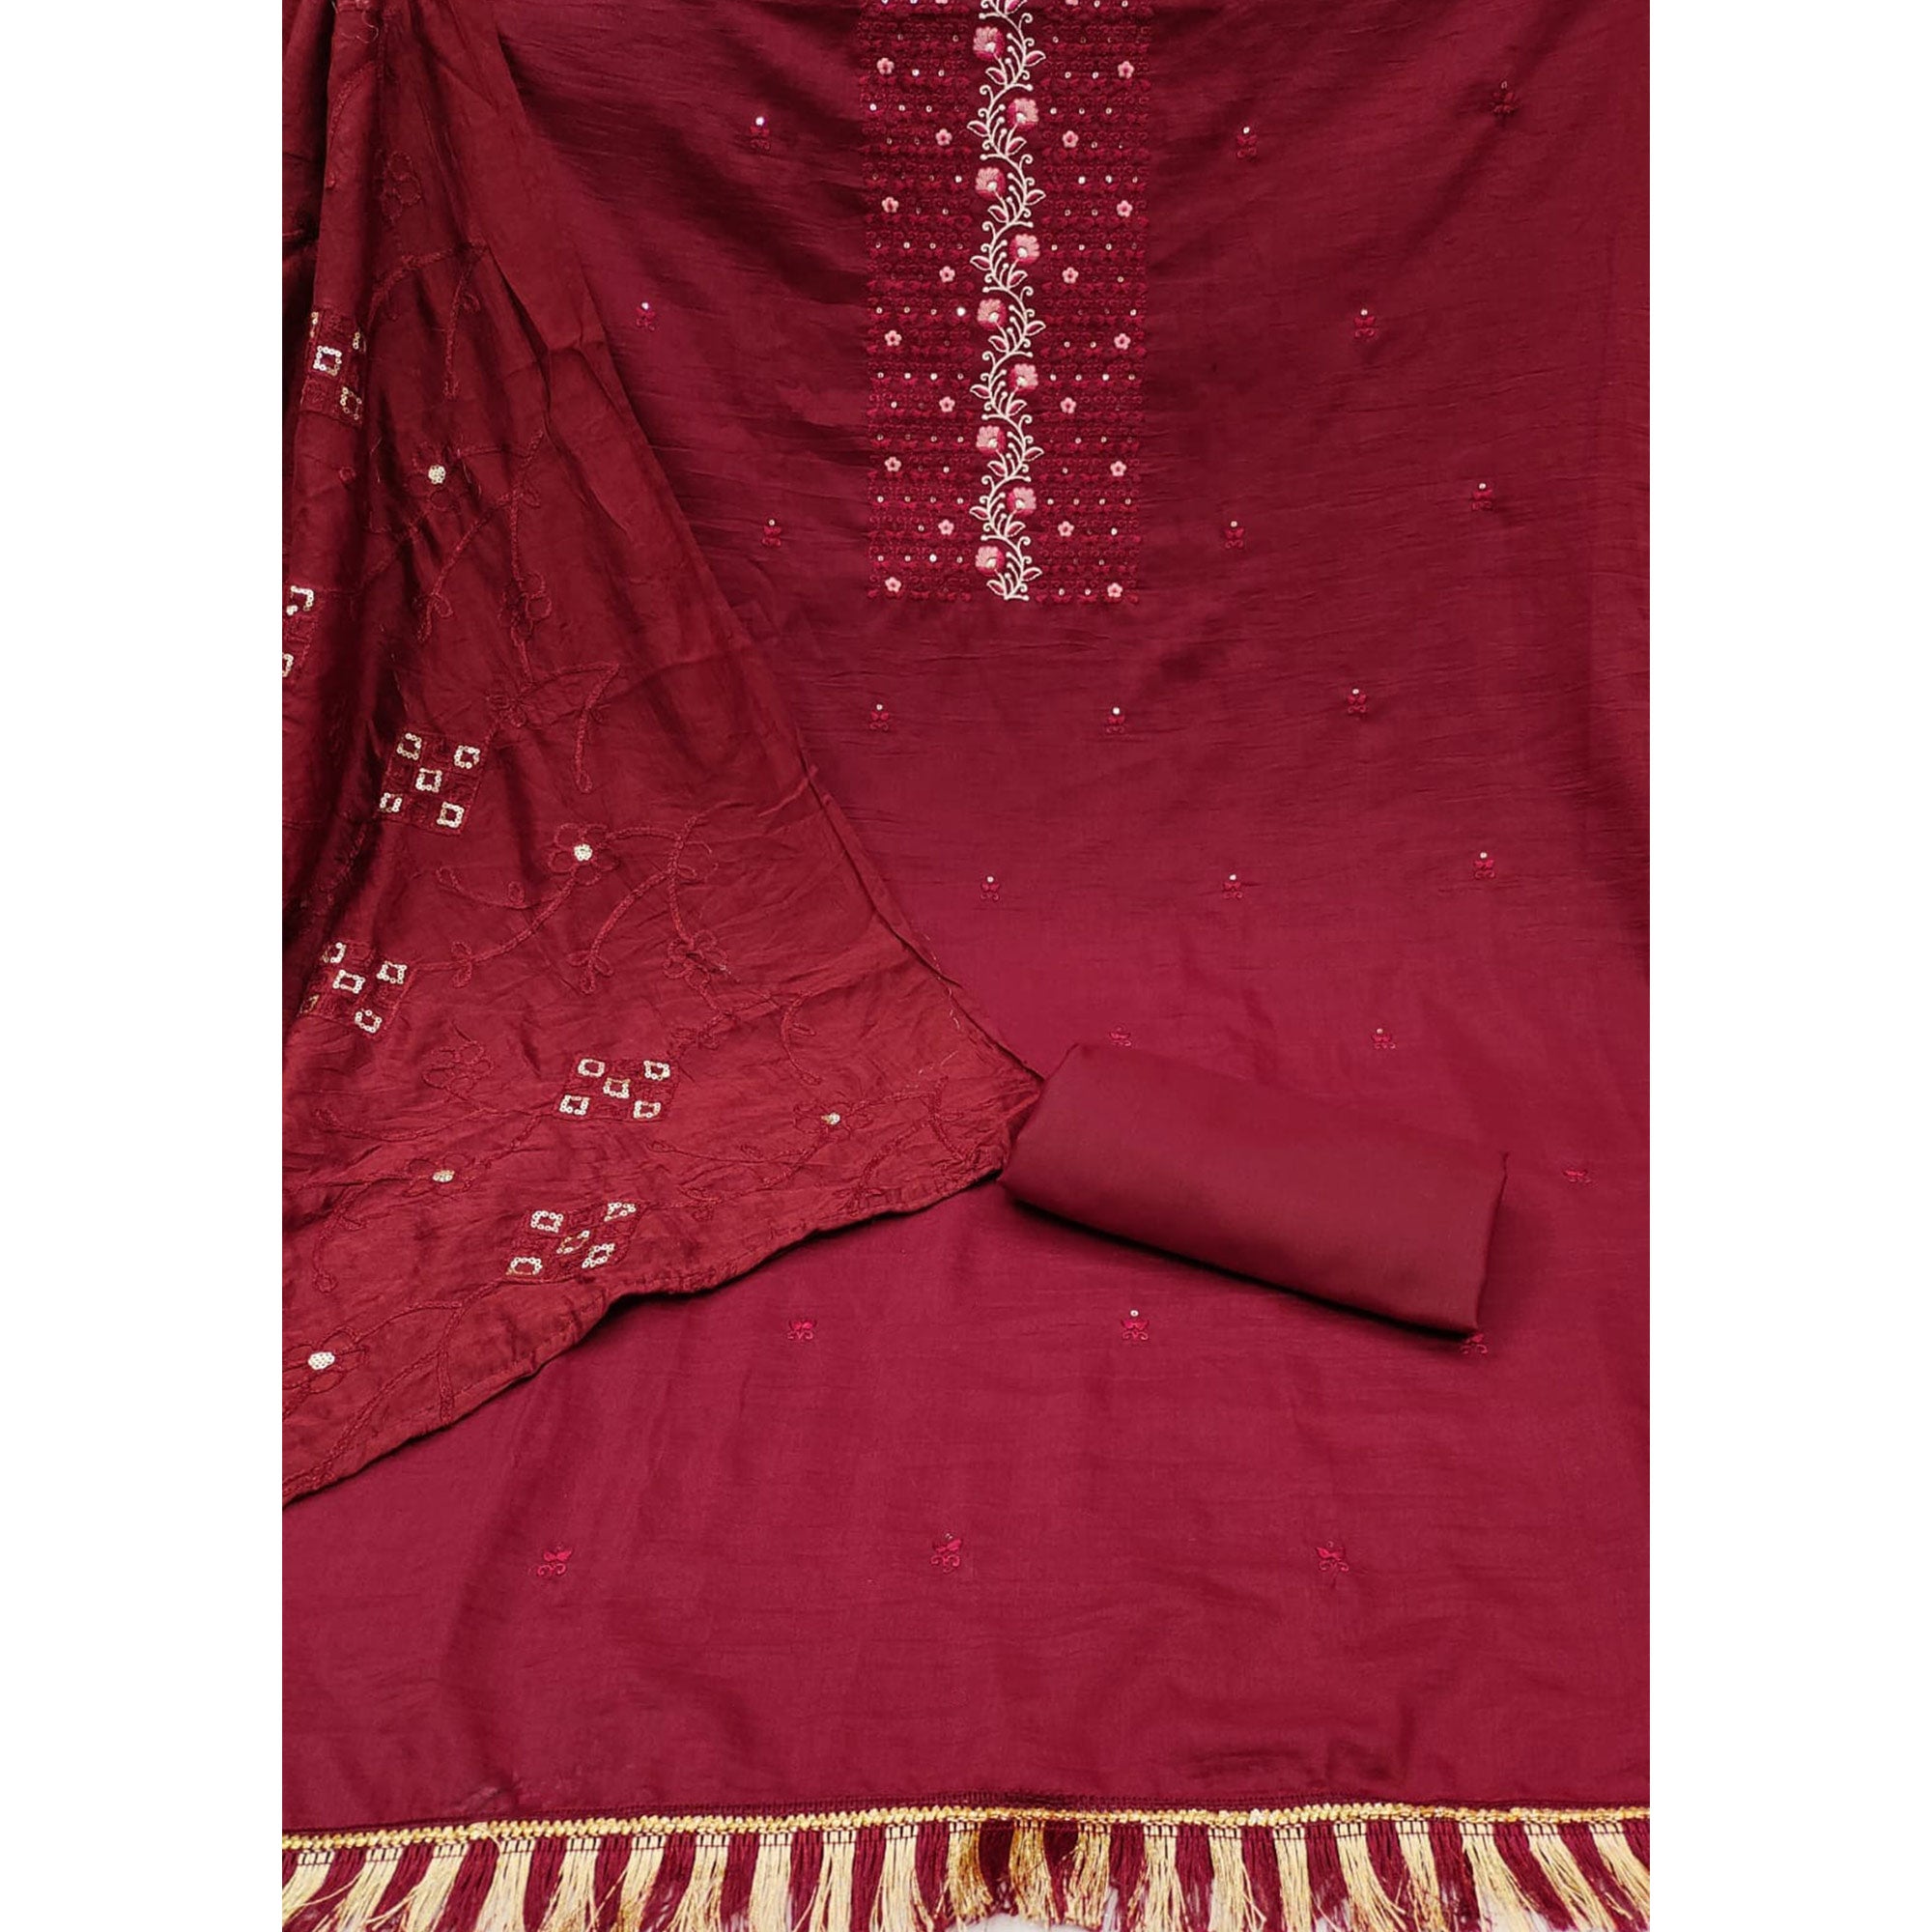 Maroon Floral Embroidered Cotton Blend Dress Material